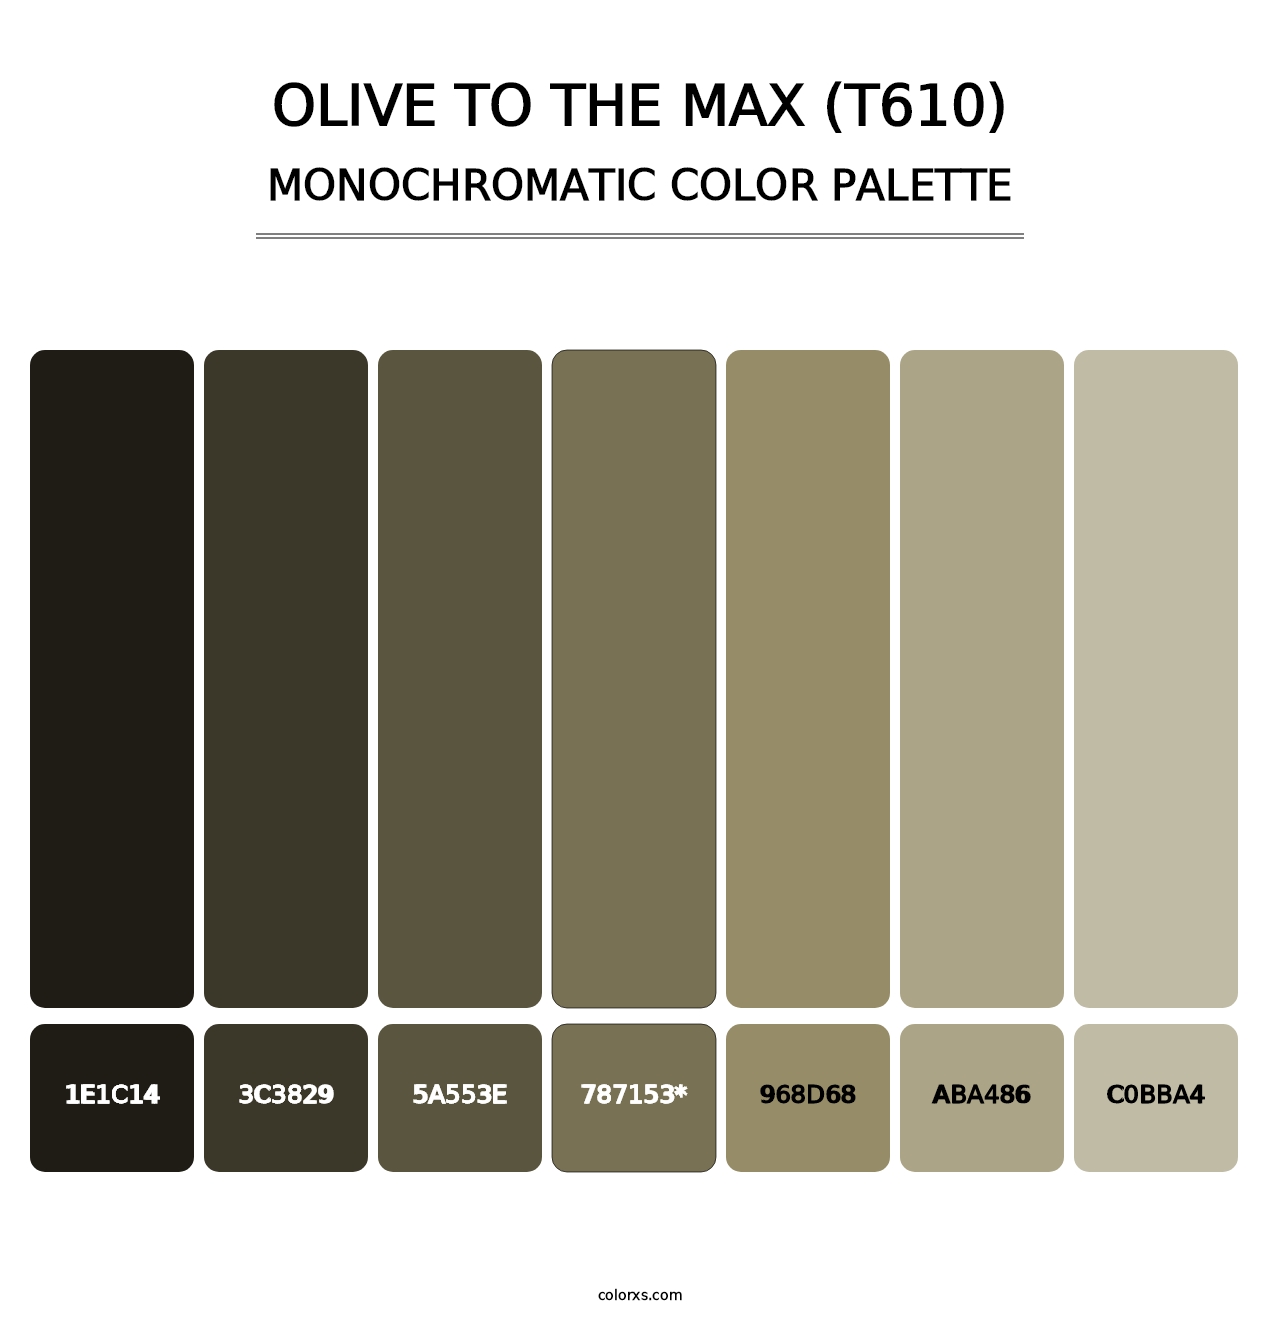 Olive to the Max (T610) - Monochromatic Color Palette